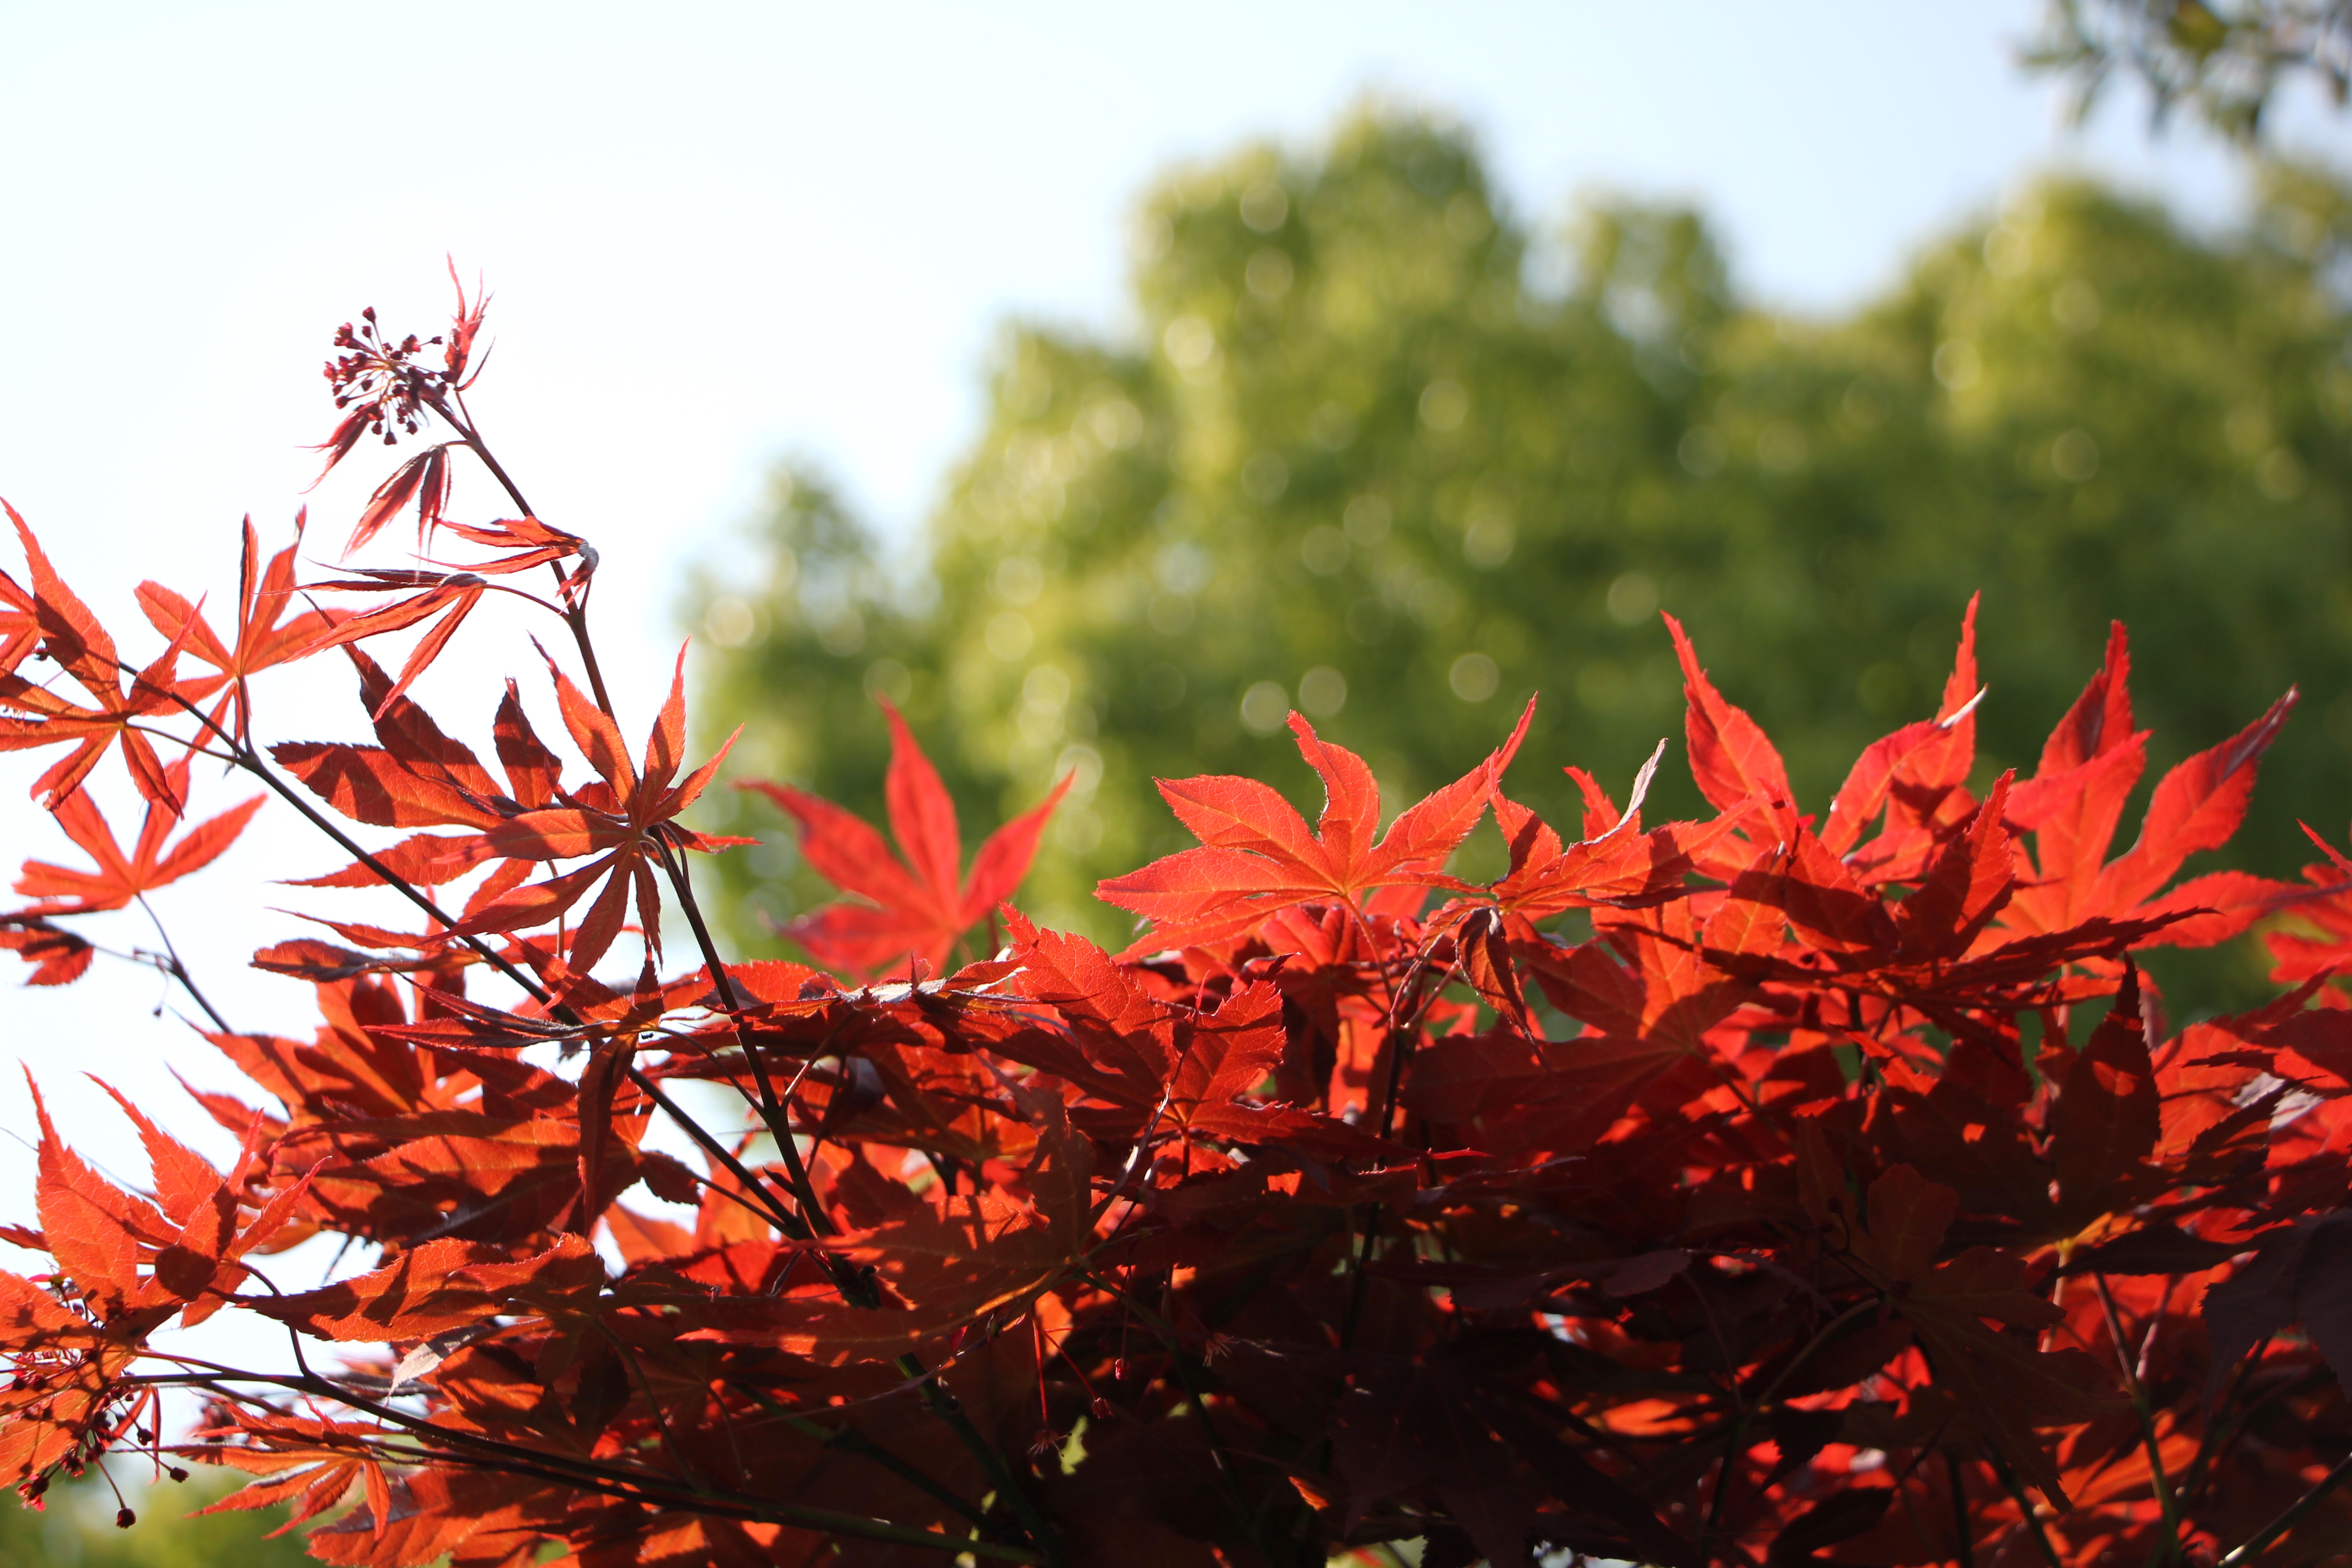 General 5184x3456 maple leaves leaves plants nature sunlight red branch closeup